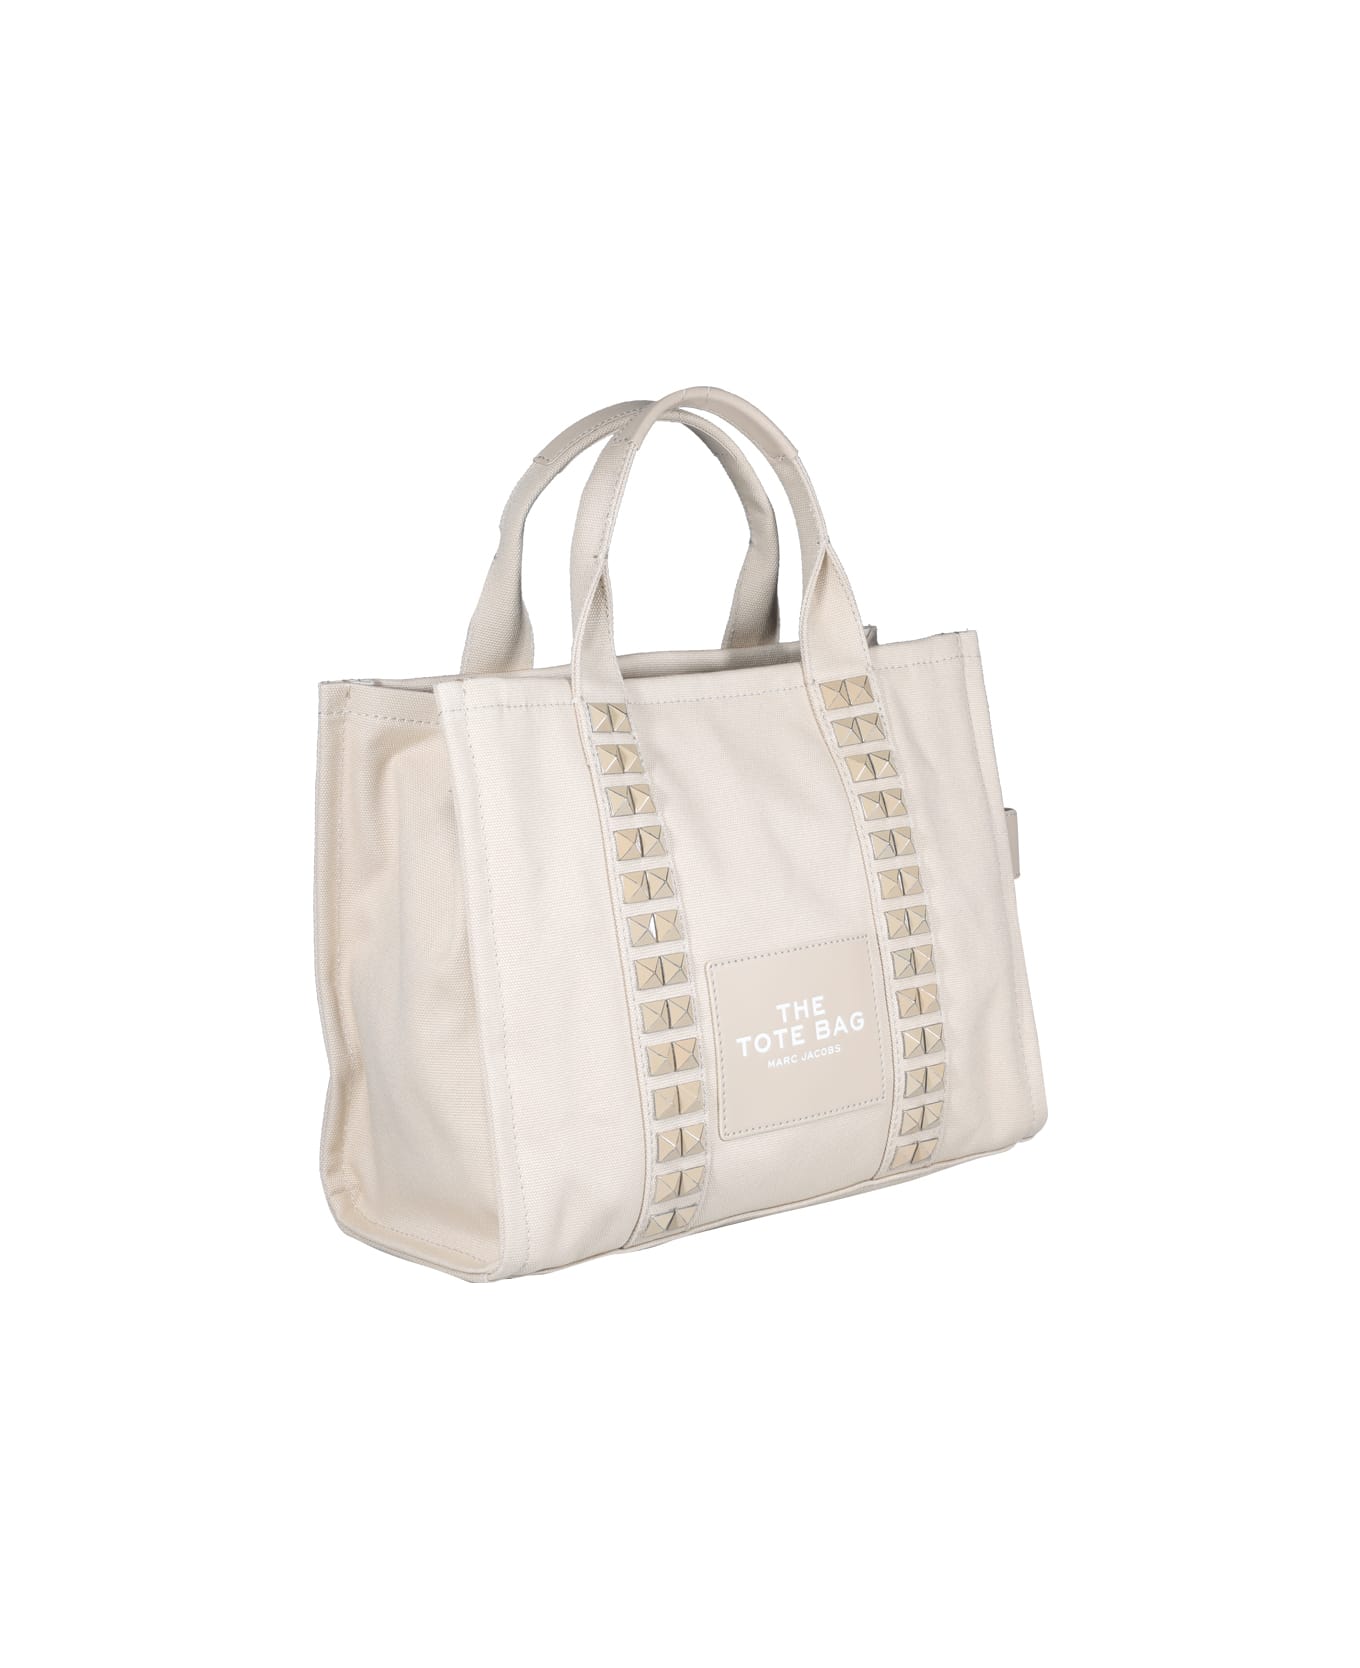 MARC JACOBS The Studded Medium Tote